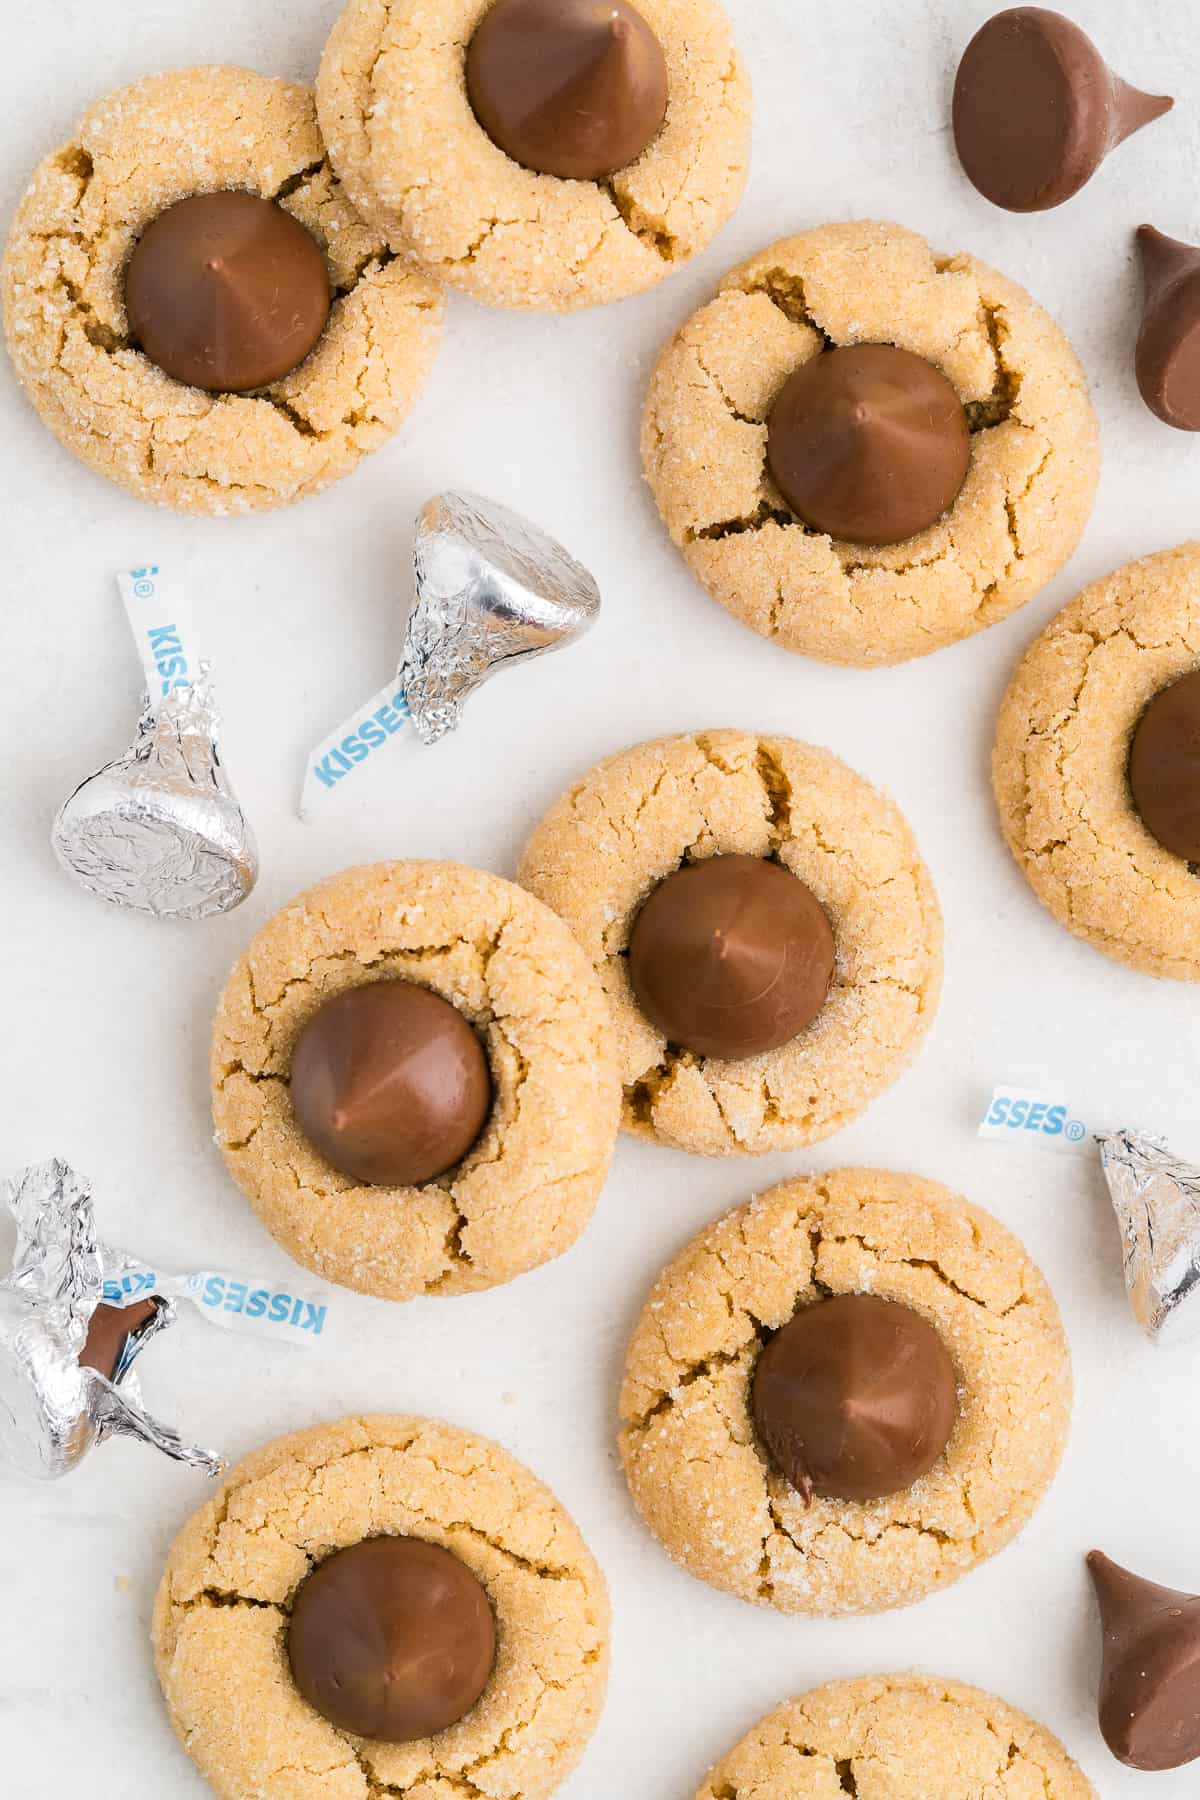 Hershey's Peanut Butter Blossoms